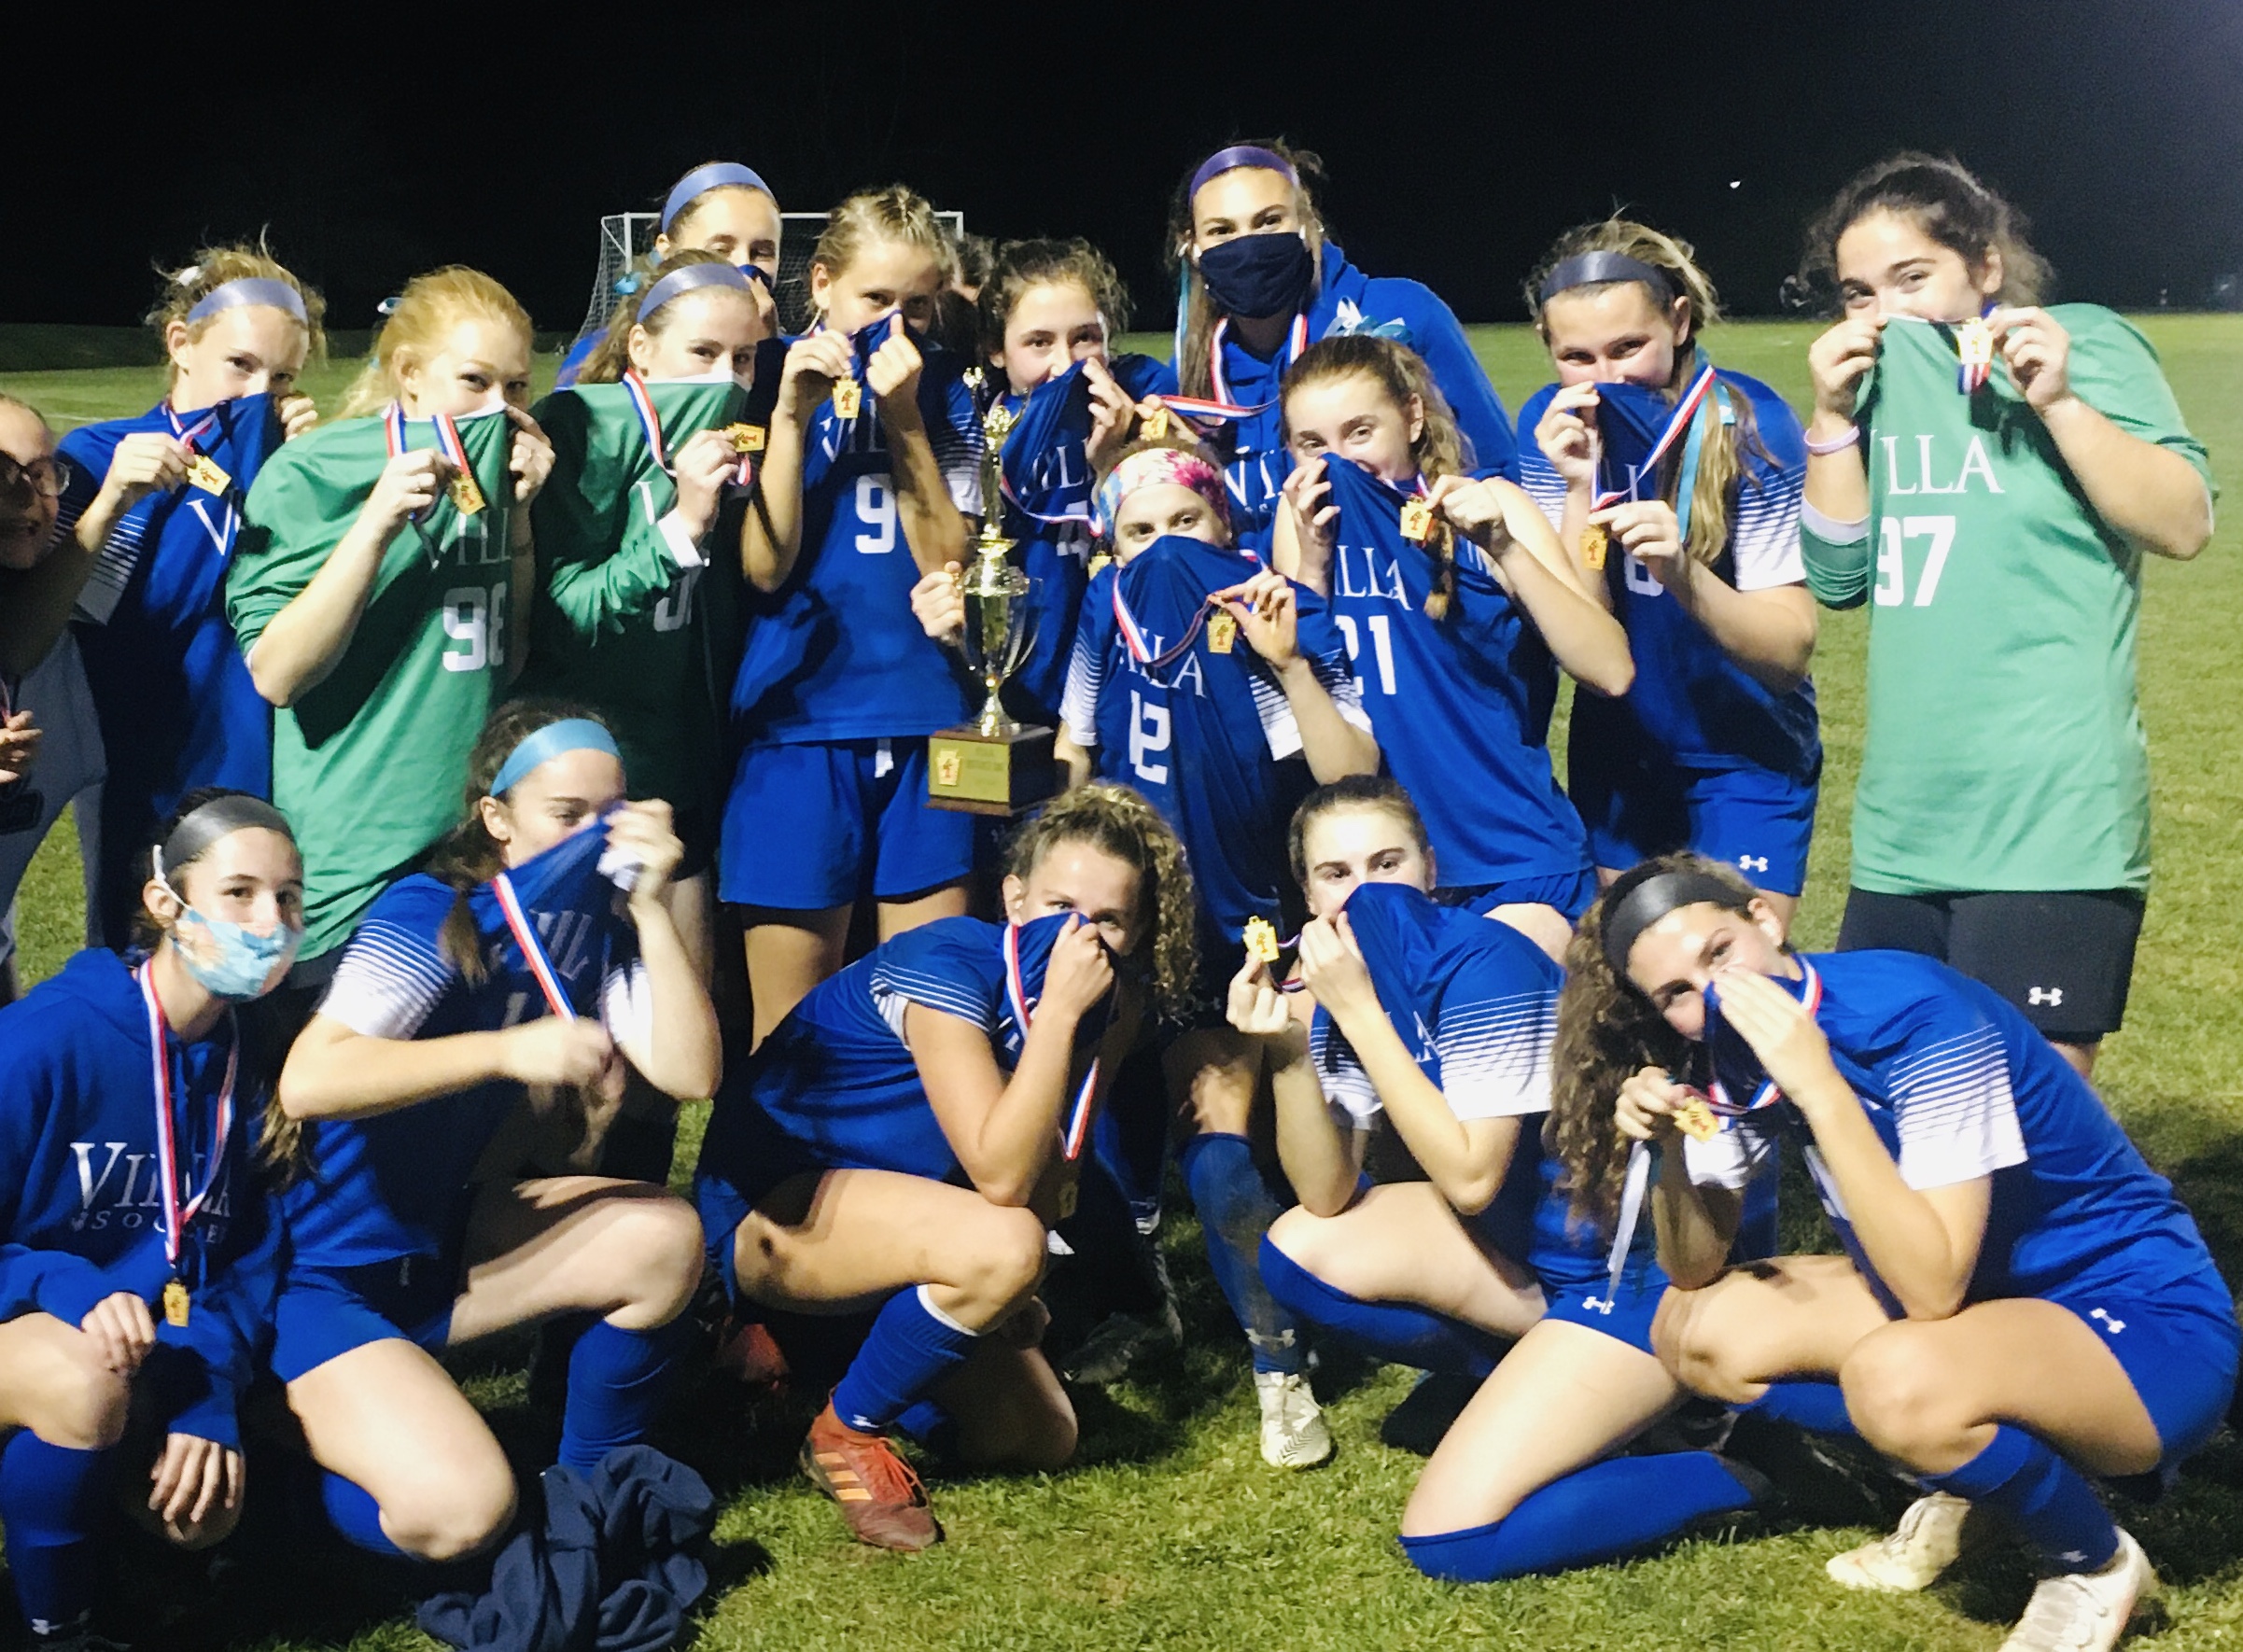 Villa Joseph Marie goes to PK’s to win District 13A title over GMA